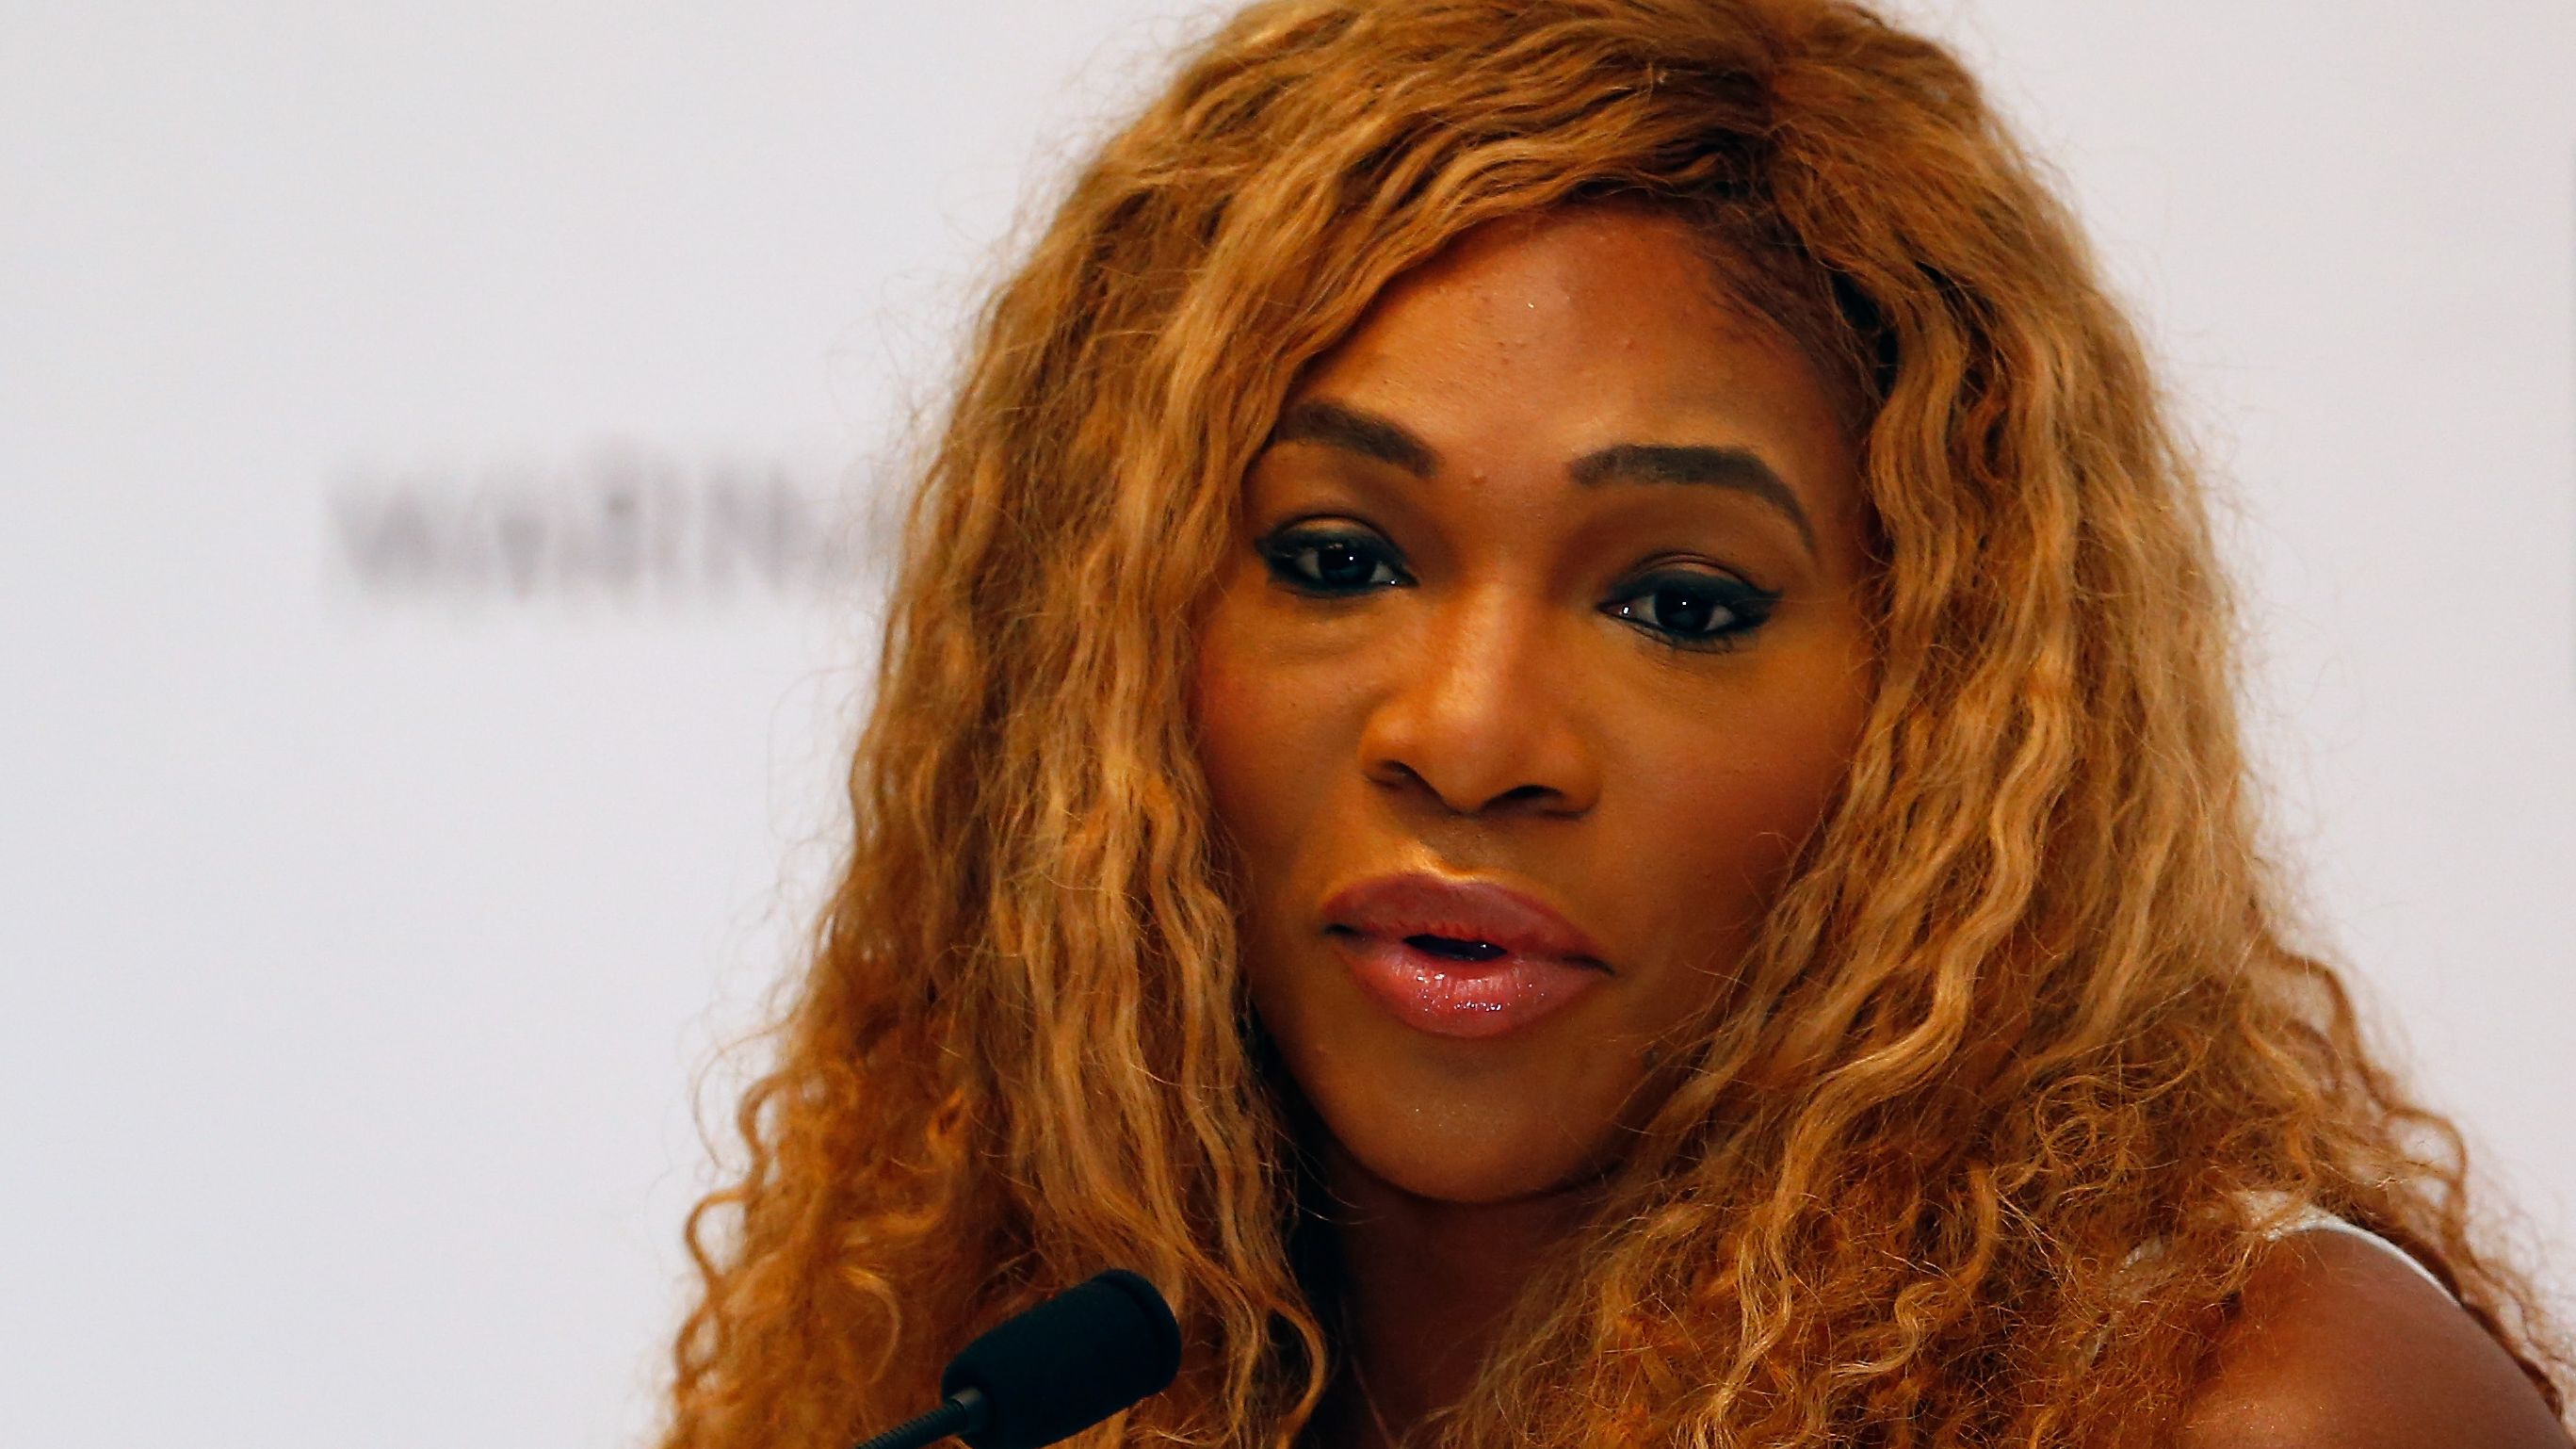 Serena Williams voiced her displeasure with Shamil Tarpischev's remarks in a media conference in Singapore.